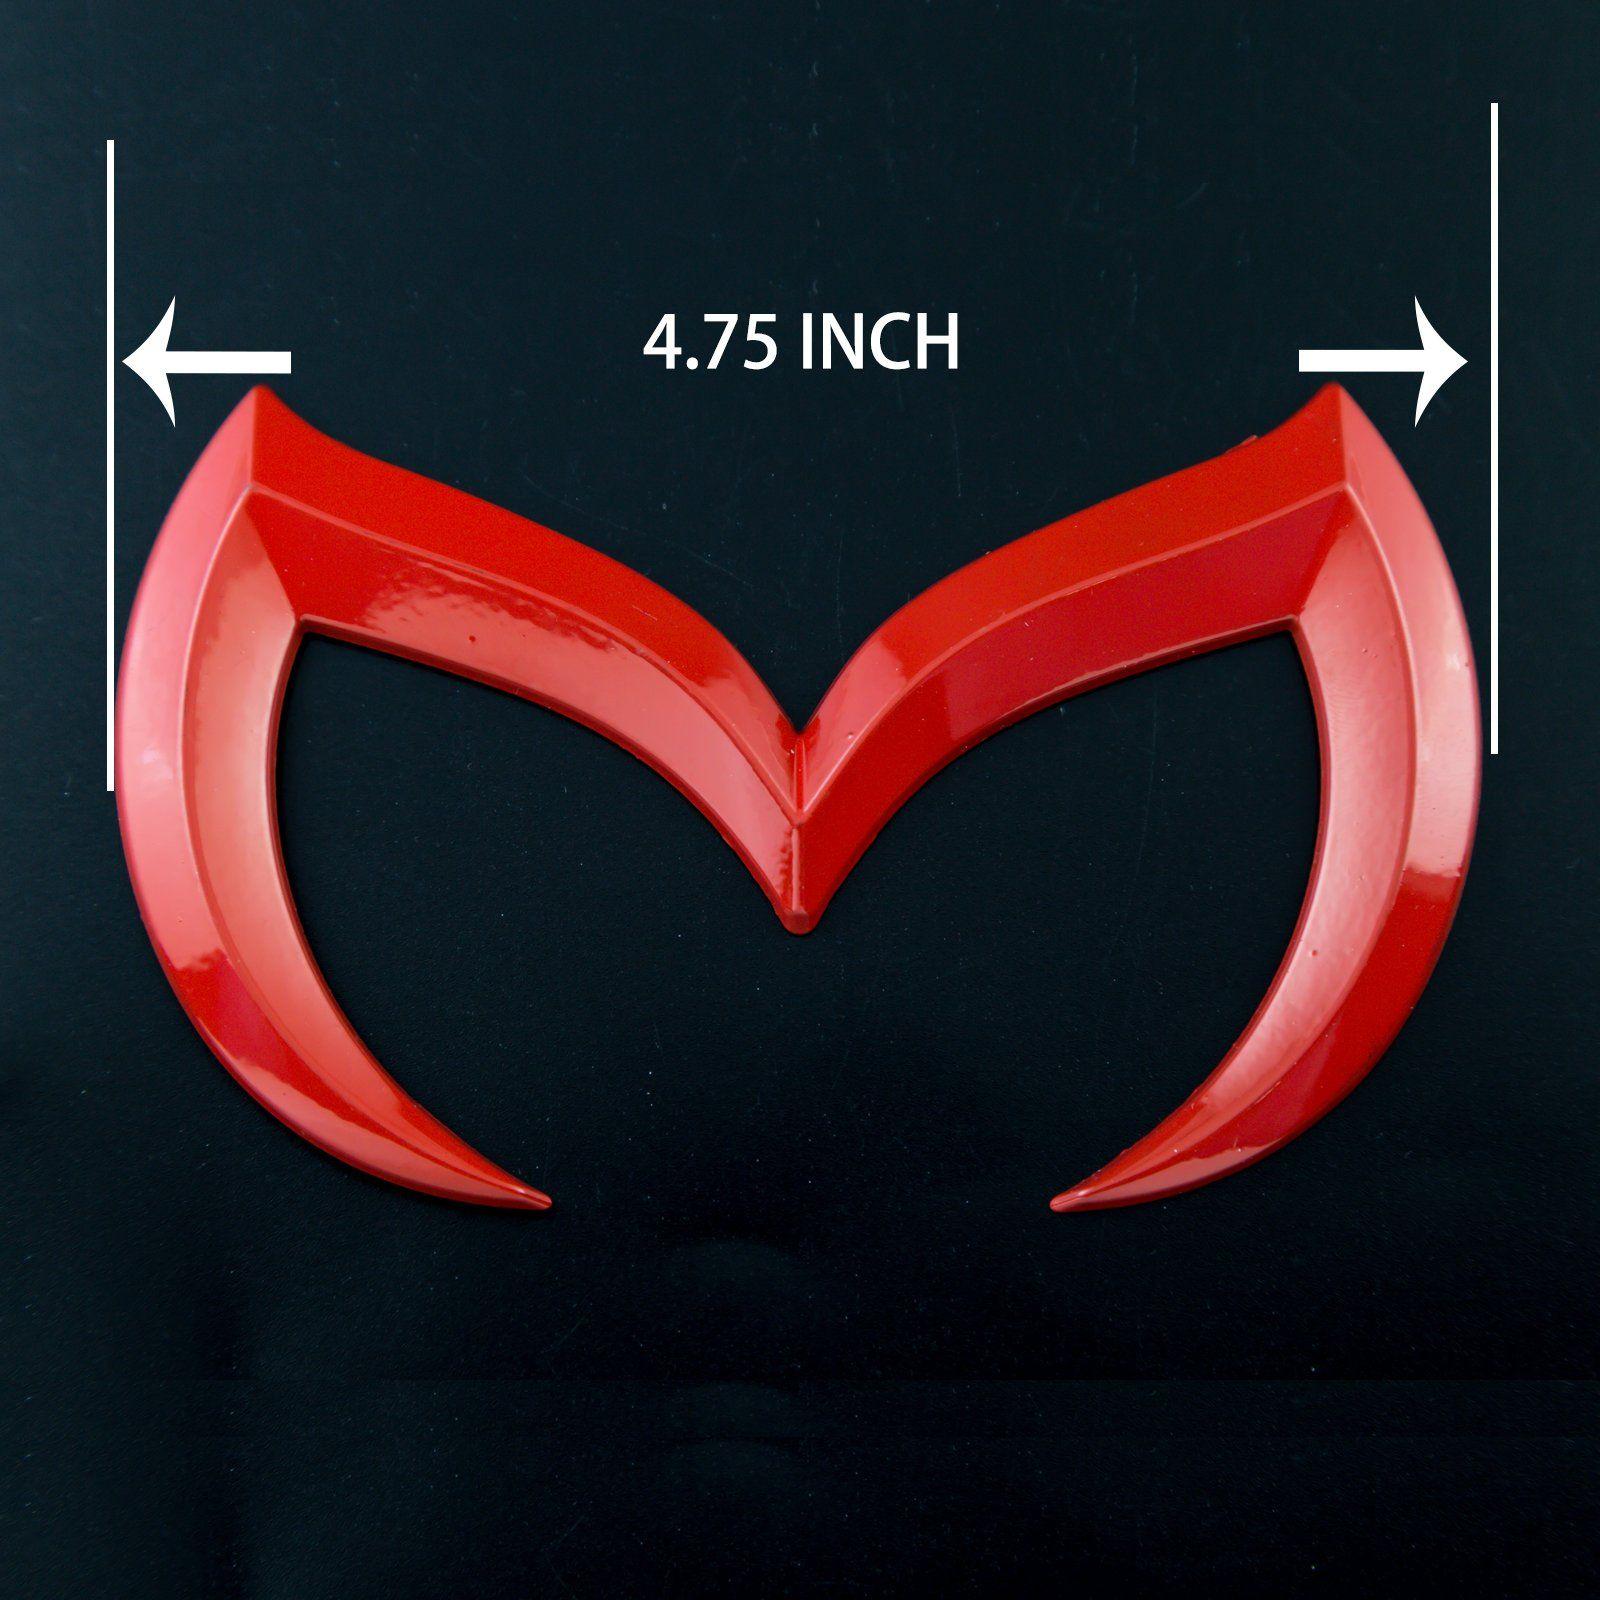 Gold and Red M Logo - Evil M Emblem Logo Badge Decal For Mazda3 6 Mazdaspeed CX 3 5 MX 5